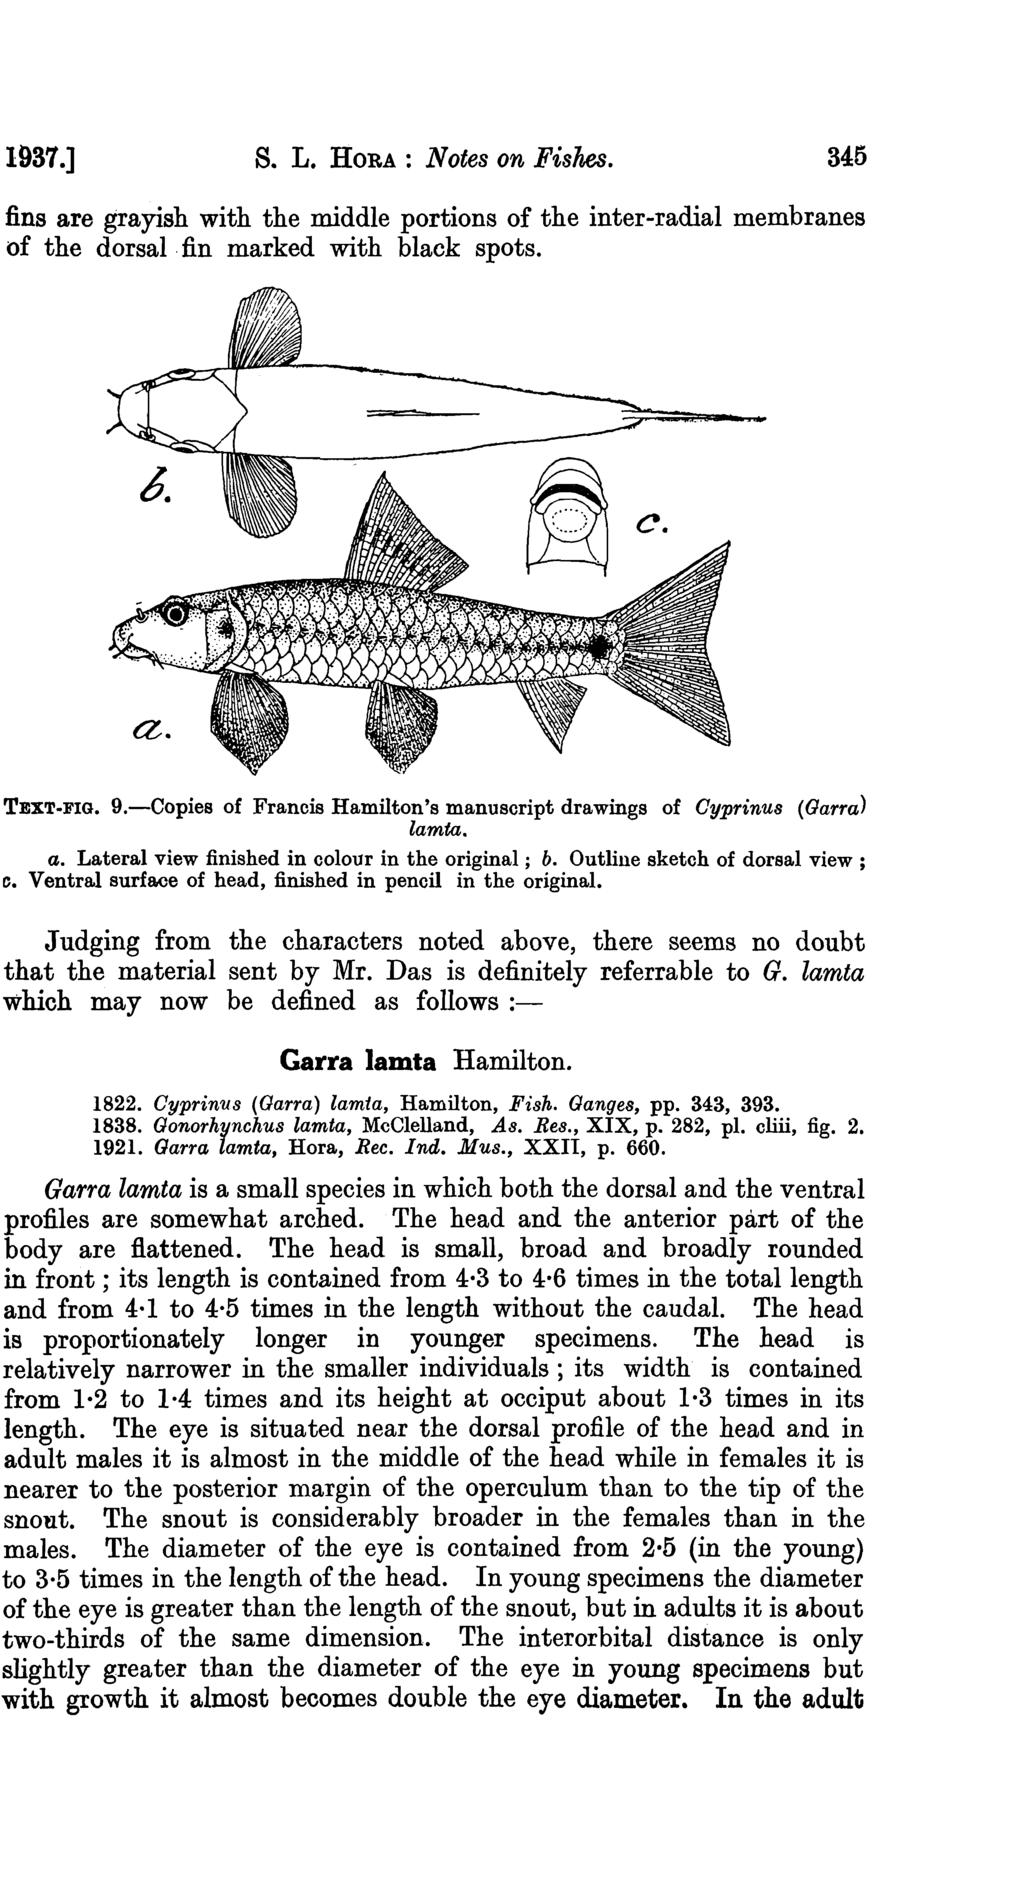 1937.] s. L. HORA : Notes on Fishes. 345 fins are grayish with the middle portions of the inter-radial membranes of the dorsal fin marked with black spots. TEXT-FIG. 9.